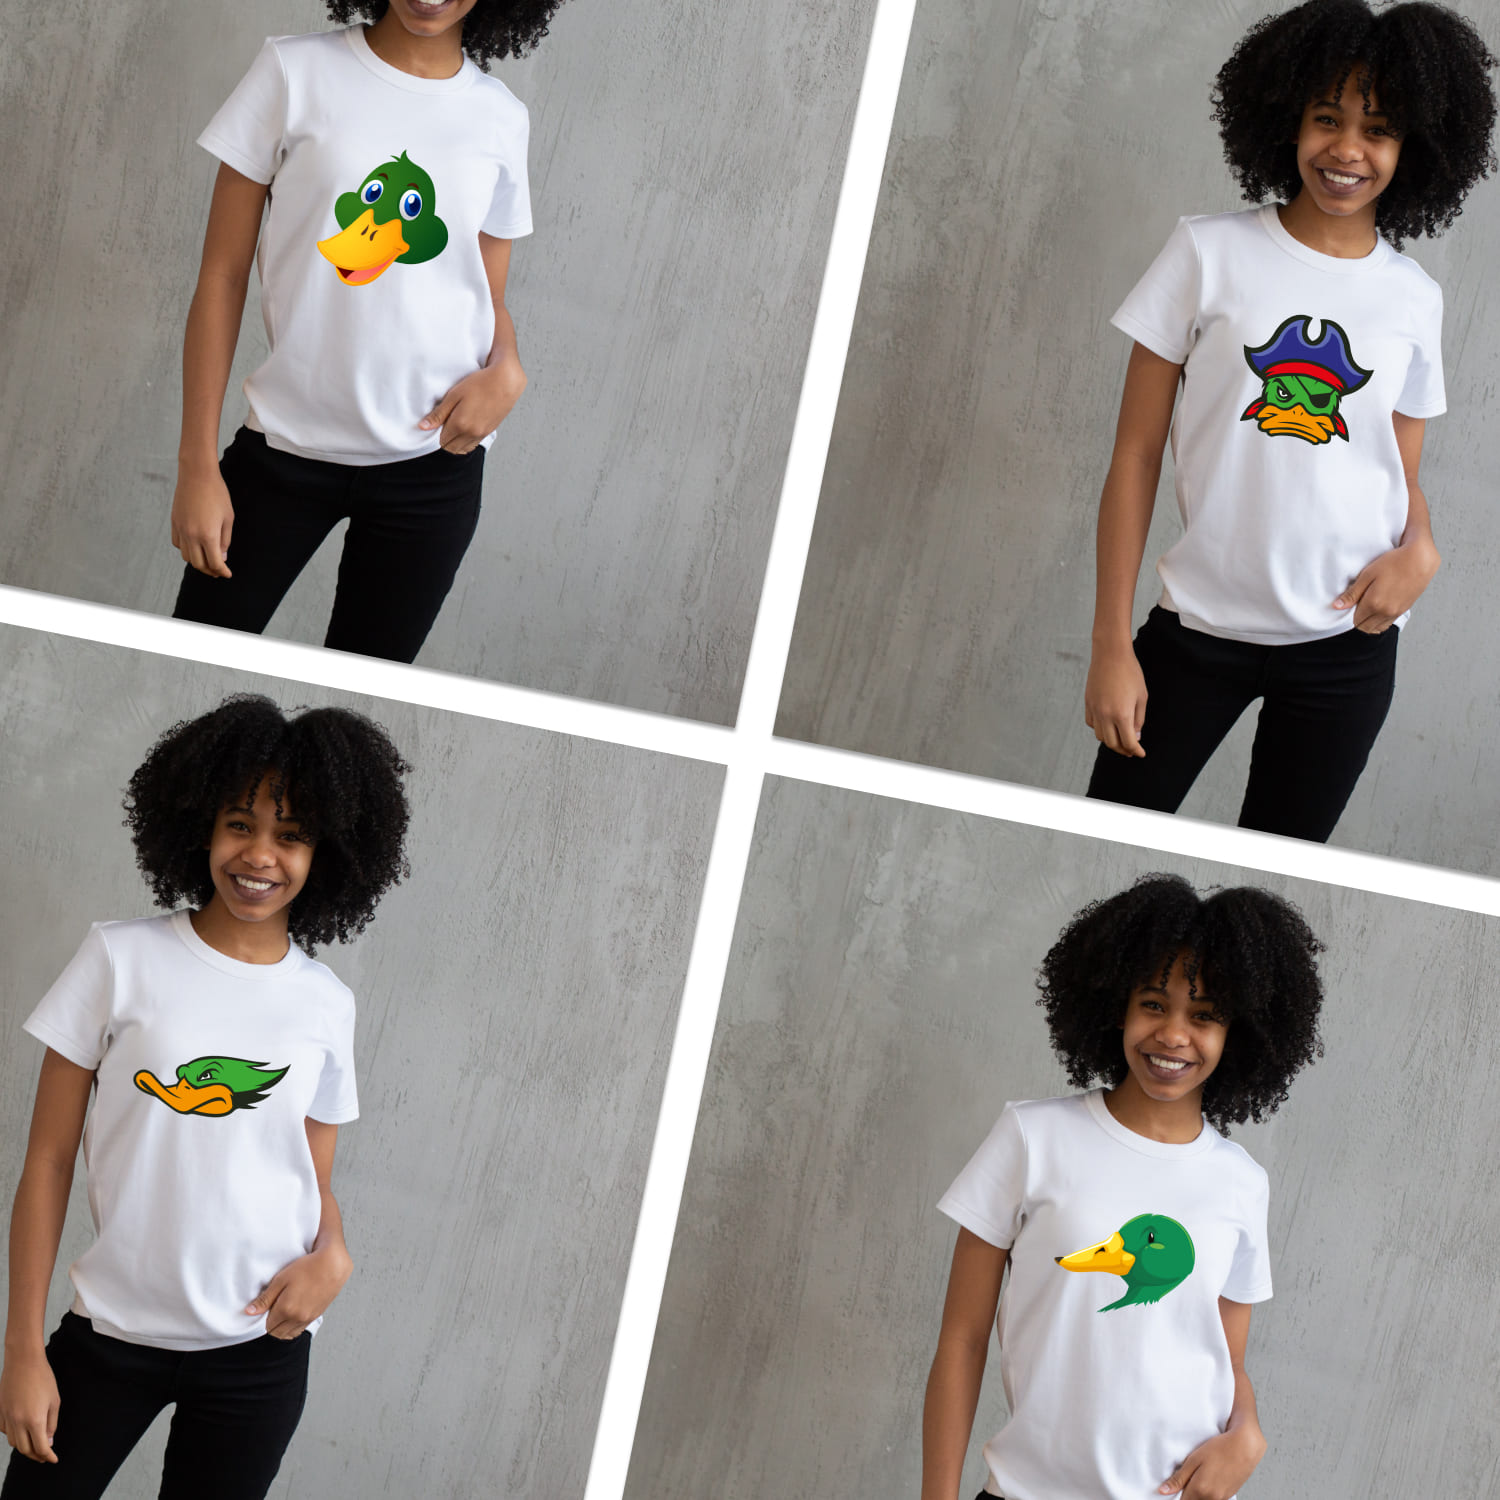 A selection of images of T-shirts with colorful prints of duck heads.